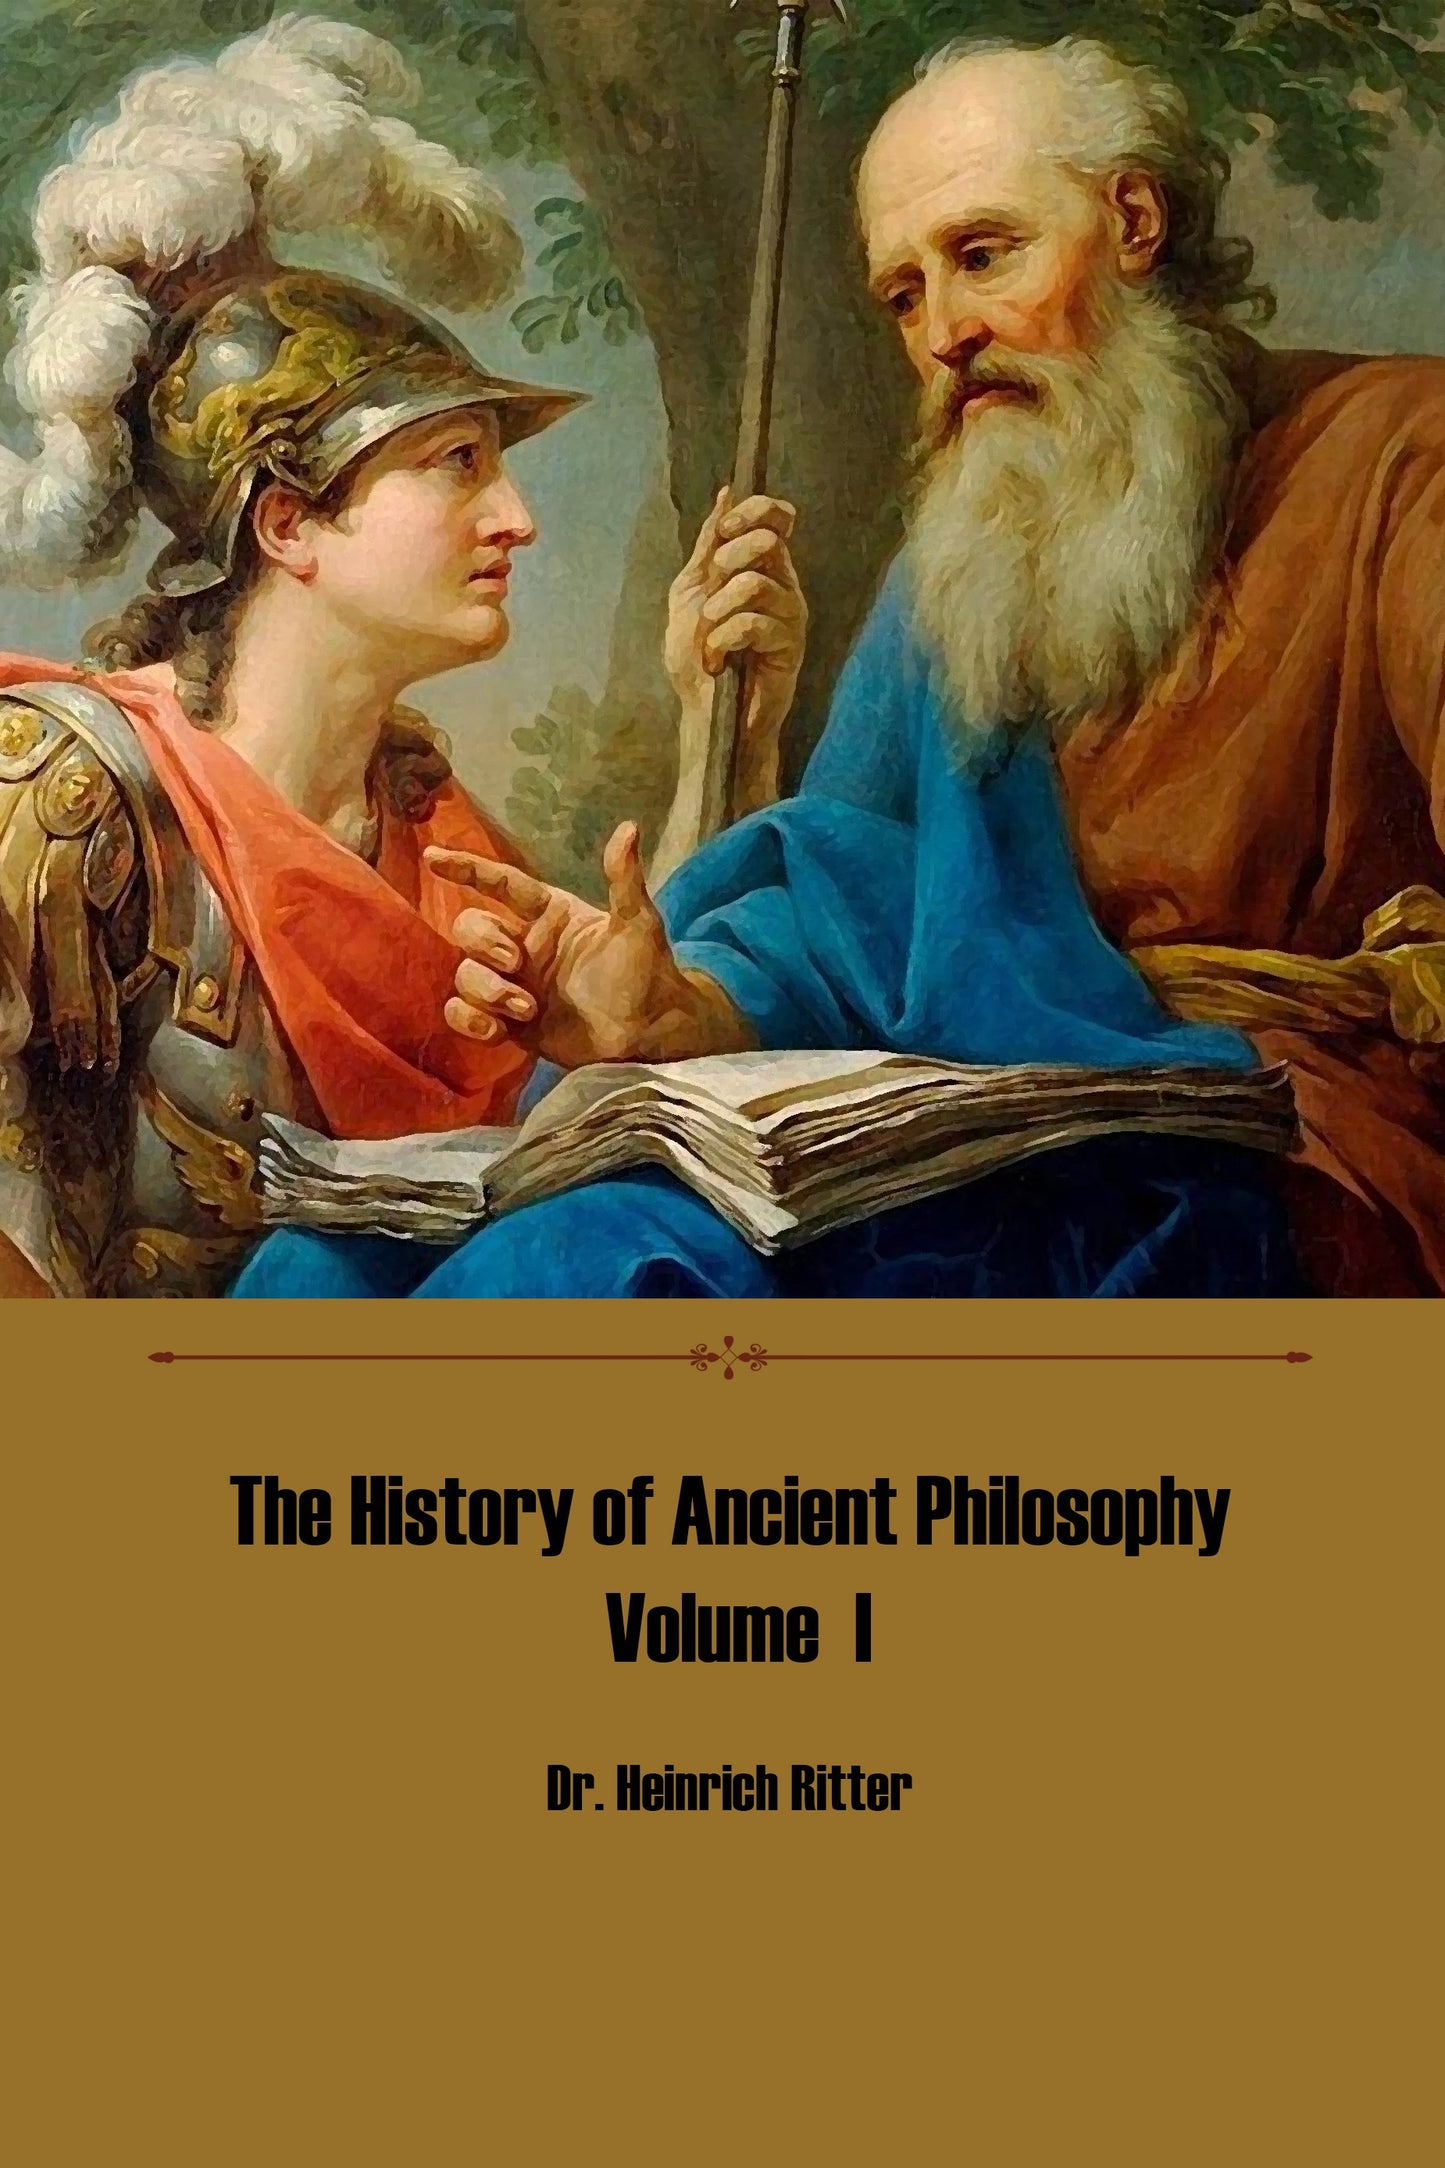 The History of Ancient Philosophy Volume I